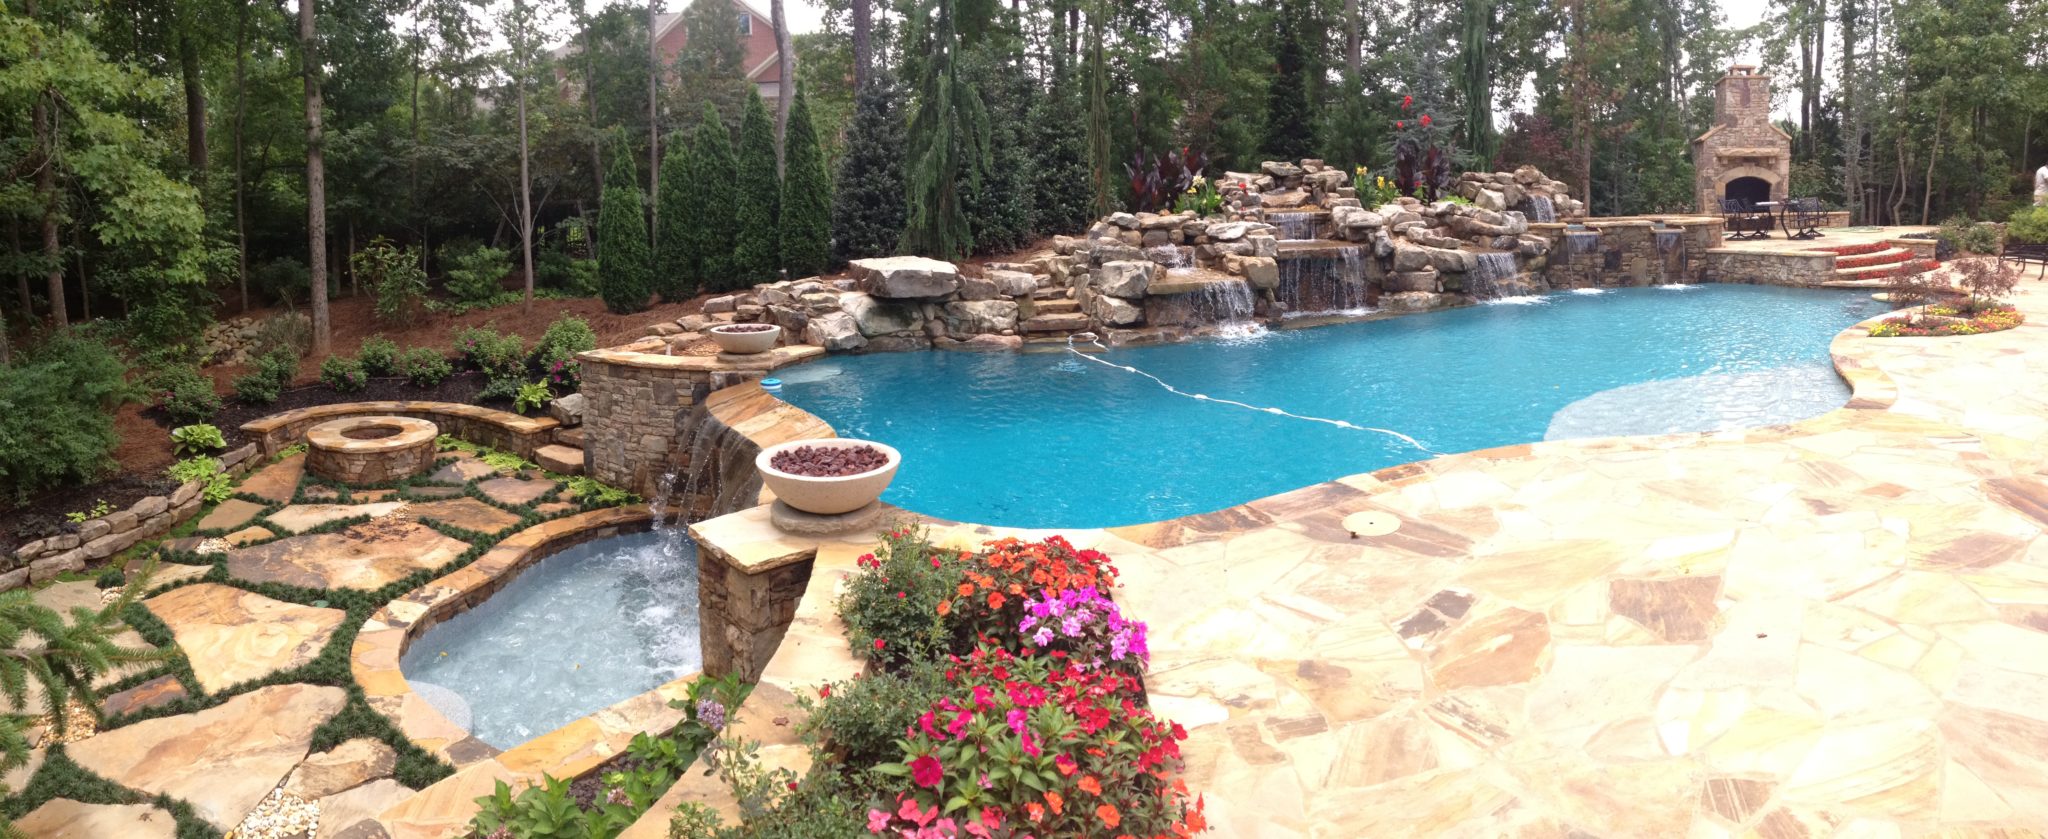 A picturesque custom freeform pool with a vanishing edge and fireplace overlooking lush landscape.